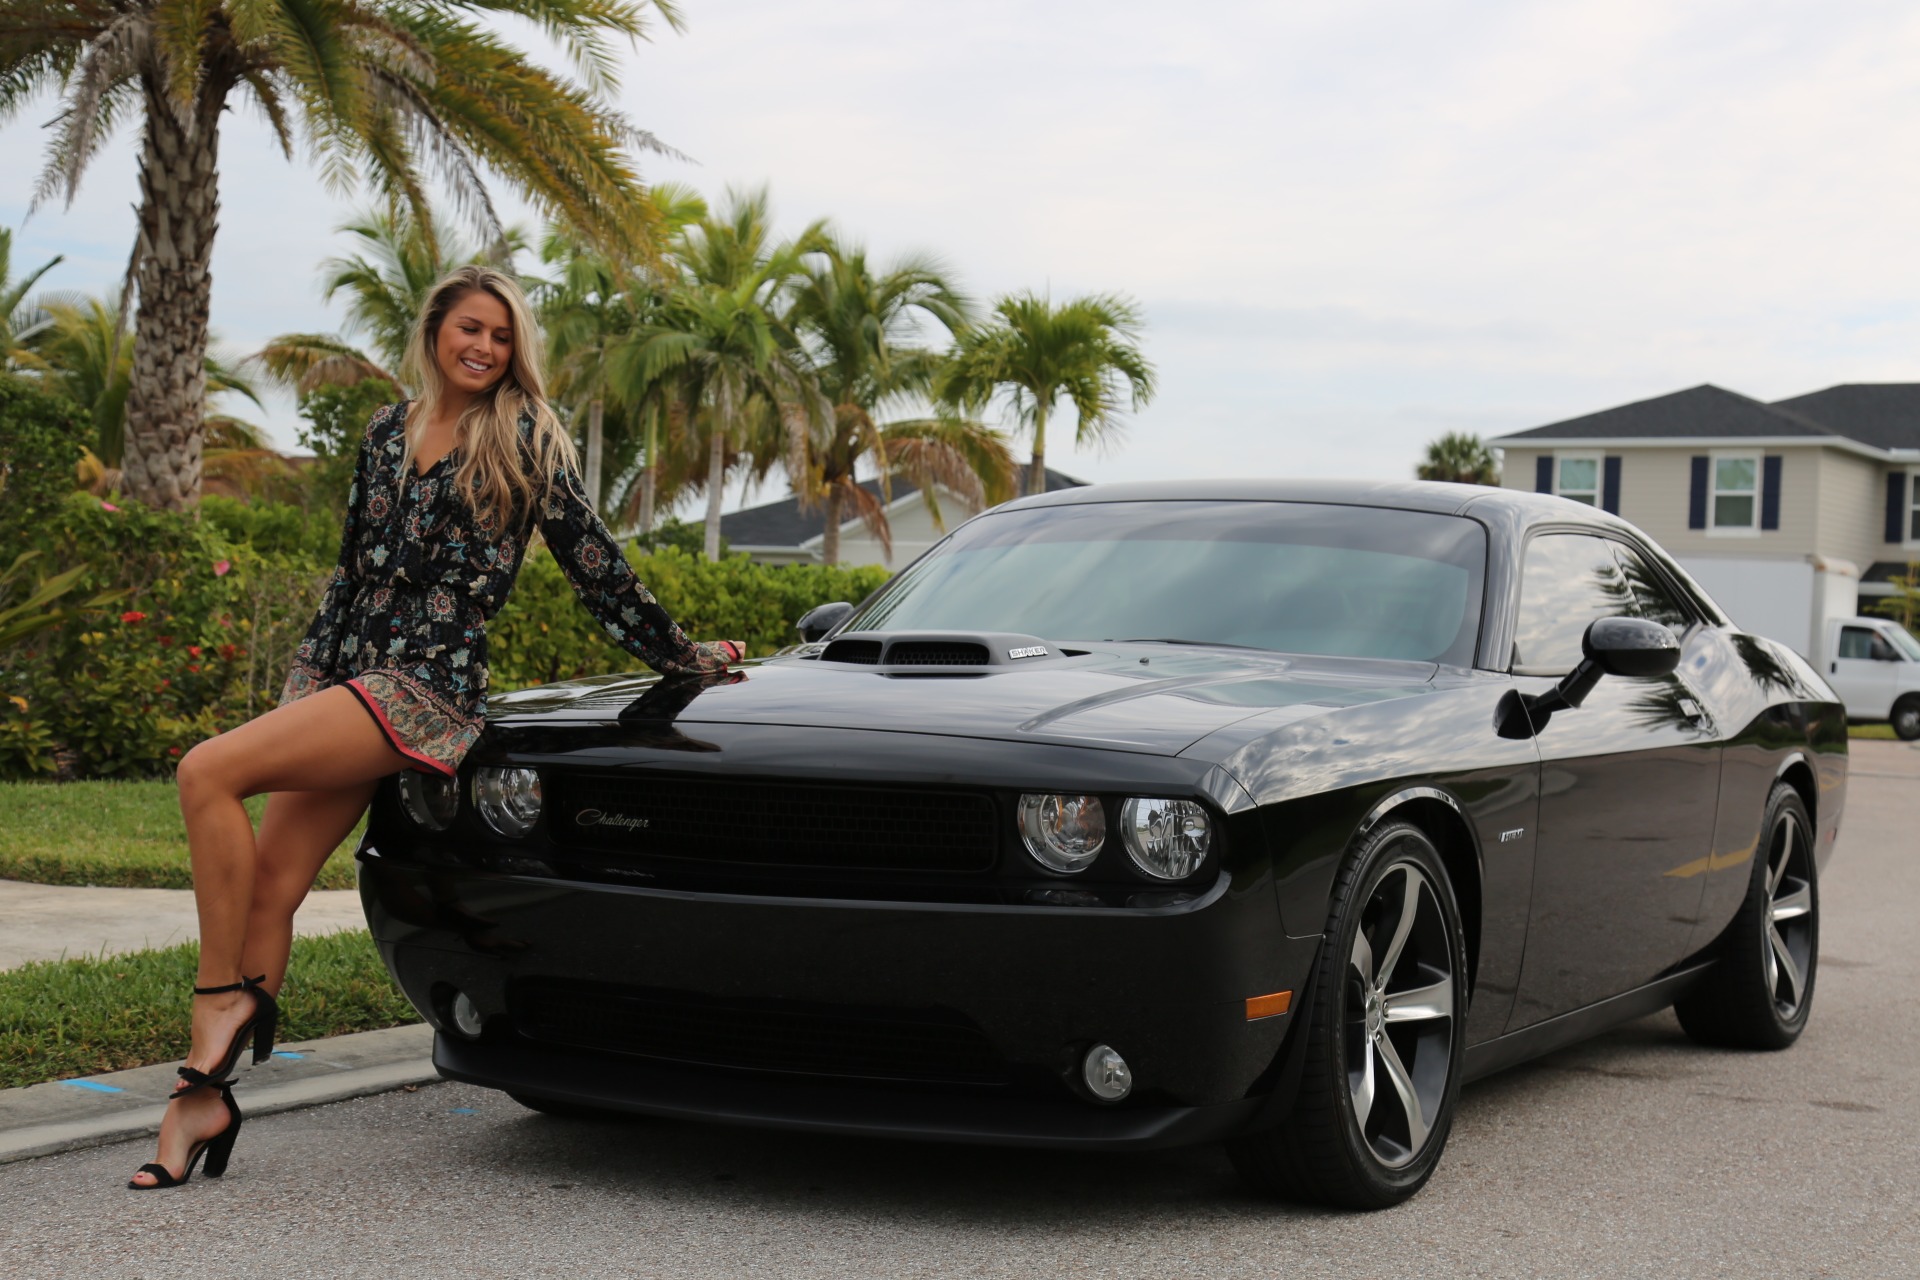 Used 2014 Dodge Challenger R/T Shaker Package for sale Sold at Muscle Cars for Sale Inc. in Fort Myers FL 33912 1